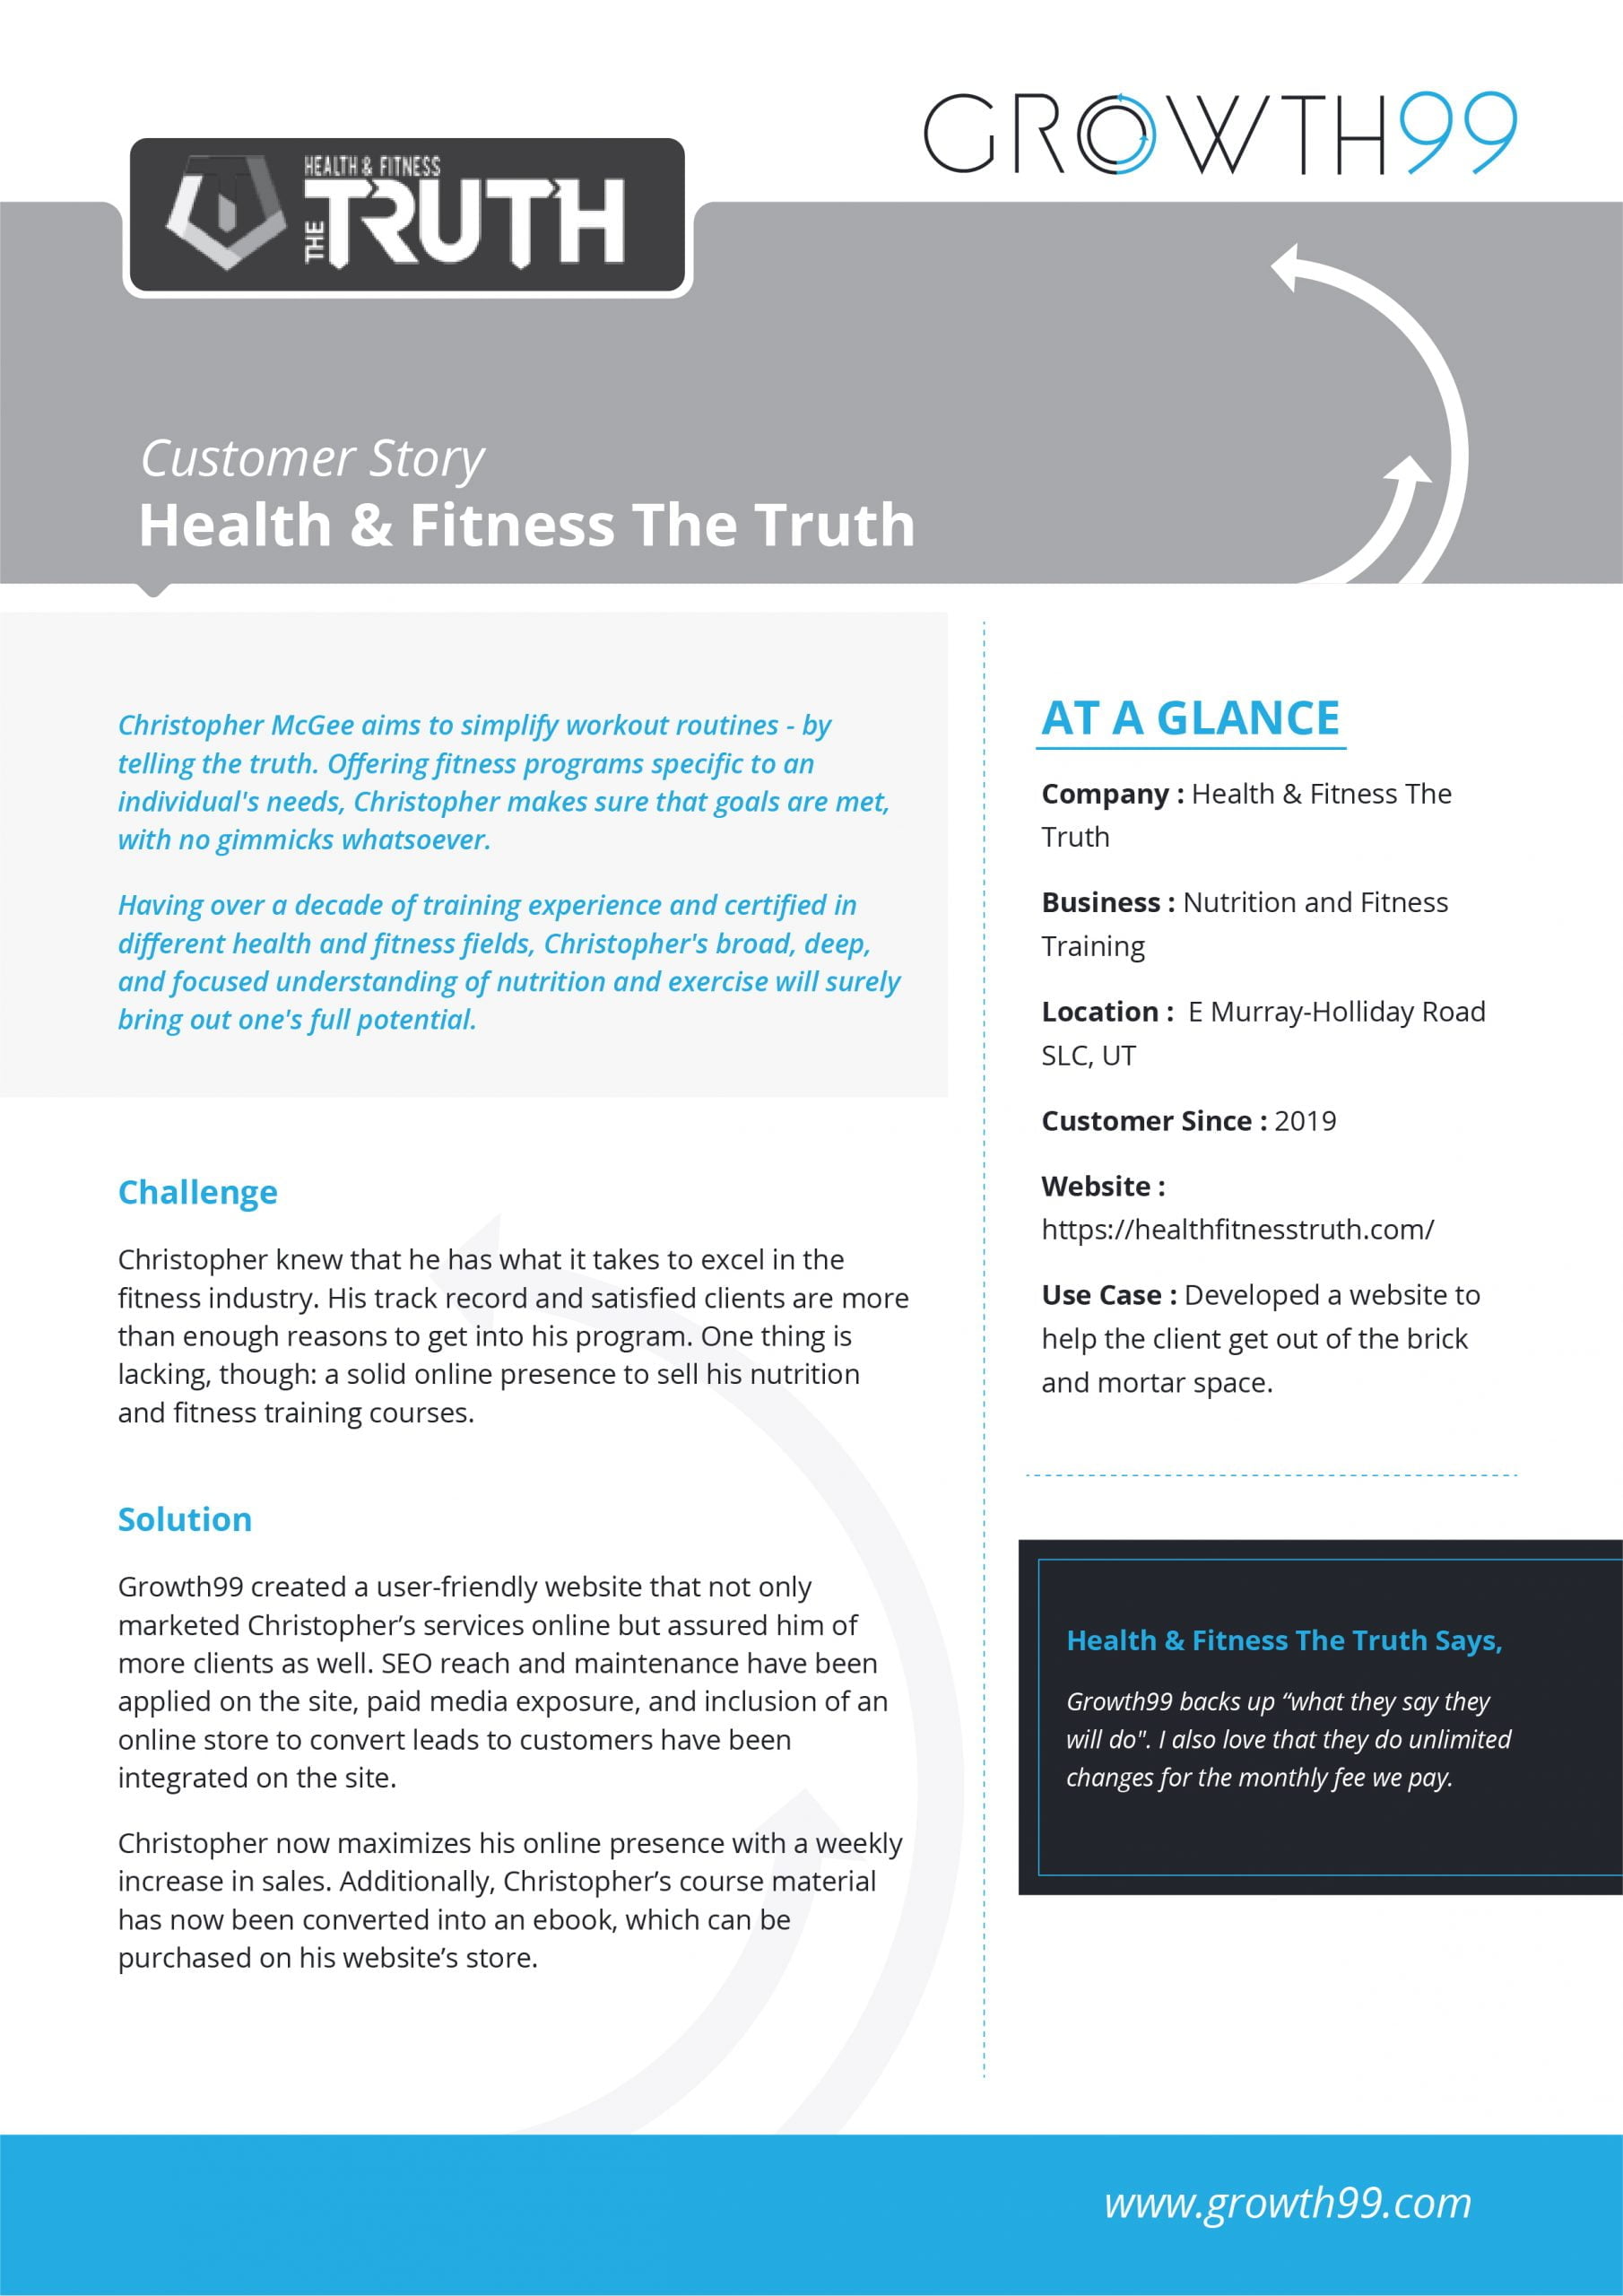 Health & Fitness The Truth Case Study